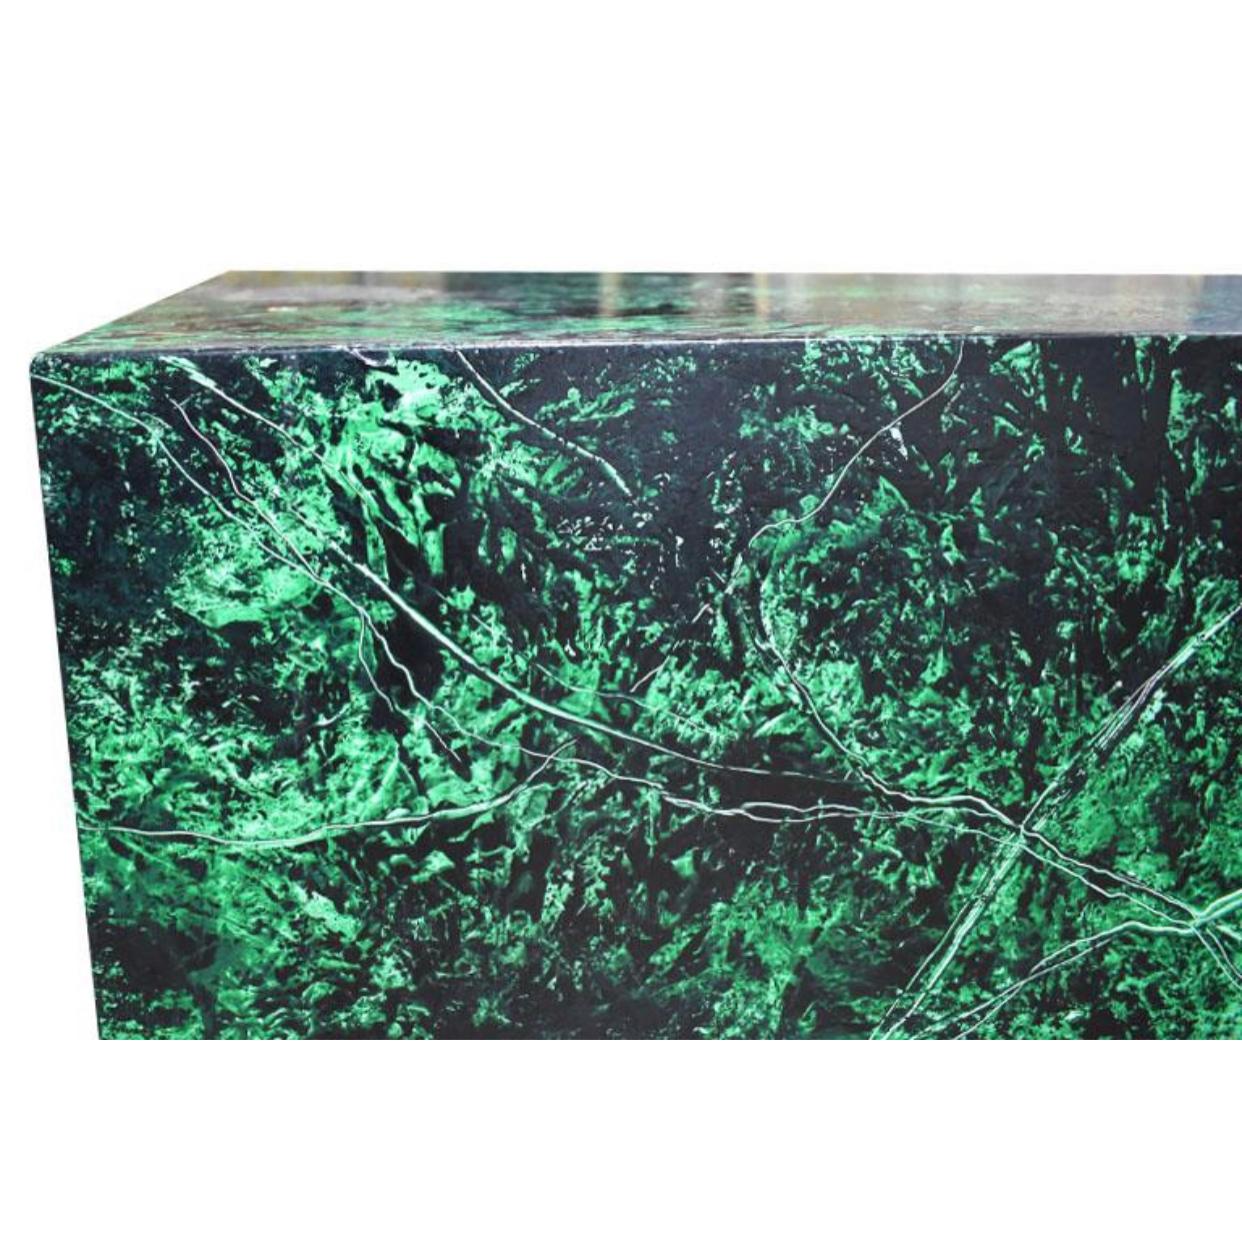 Hollywood Regency Emerald Green Faux Malachite Finish Low Wood Square Coffee or Cocktail Table